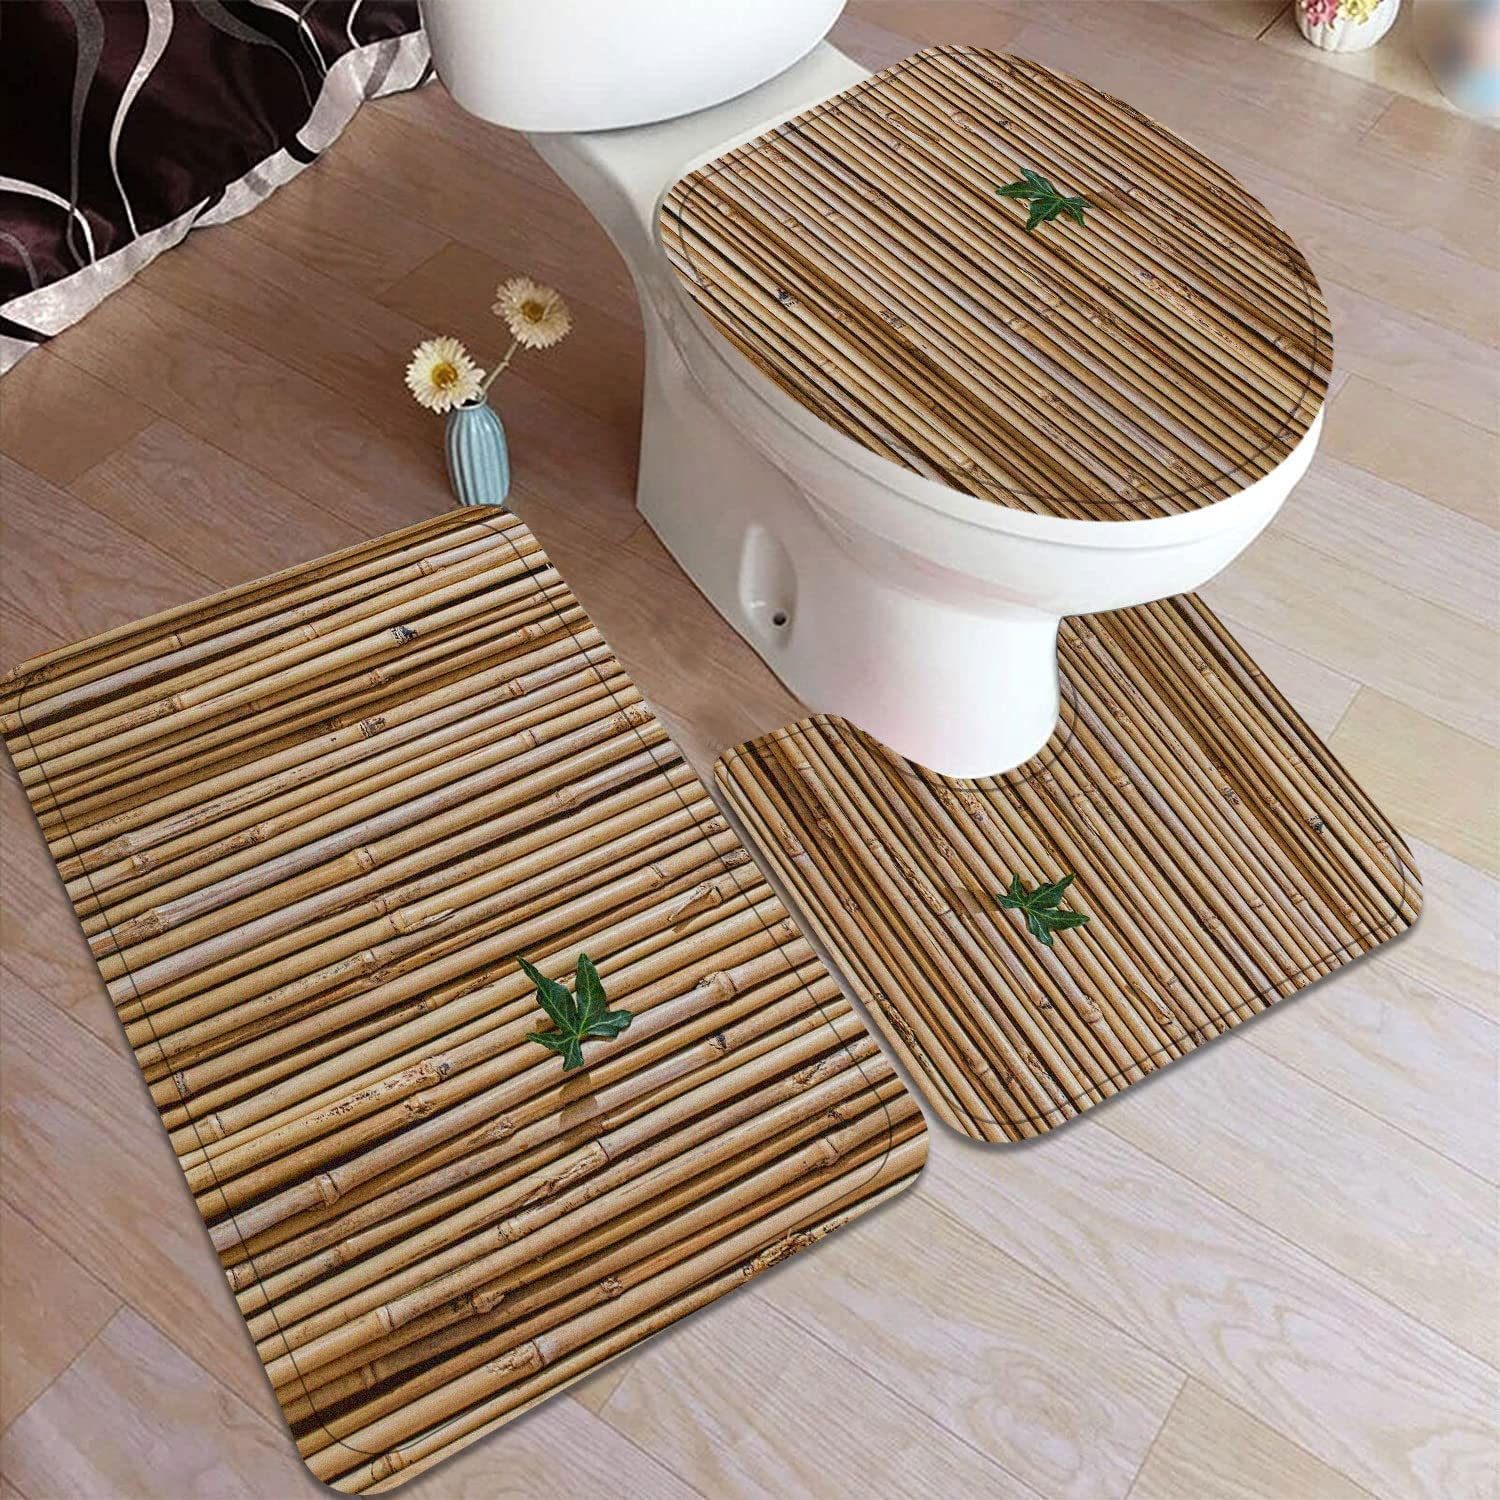  GOBAM Bamboo Bath Mat and Toilet Brush with Holder